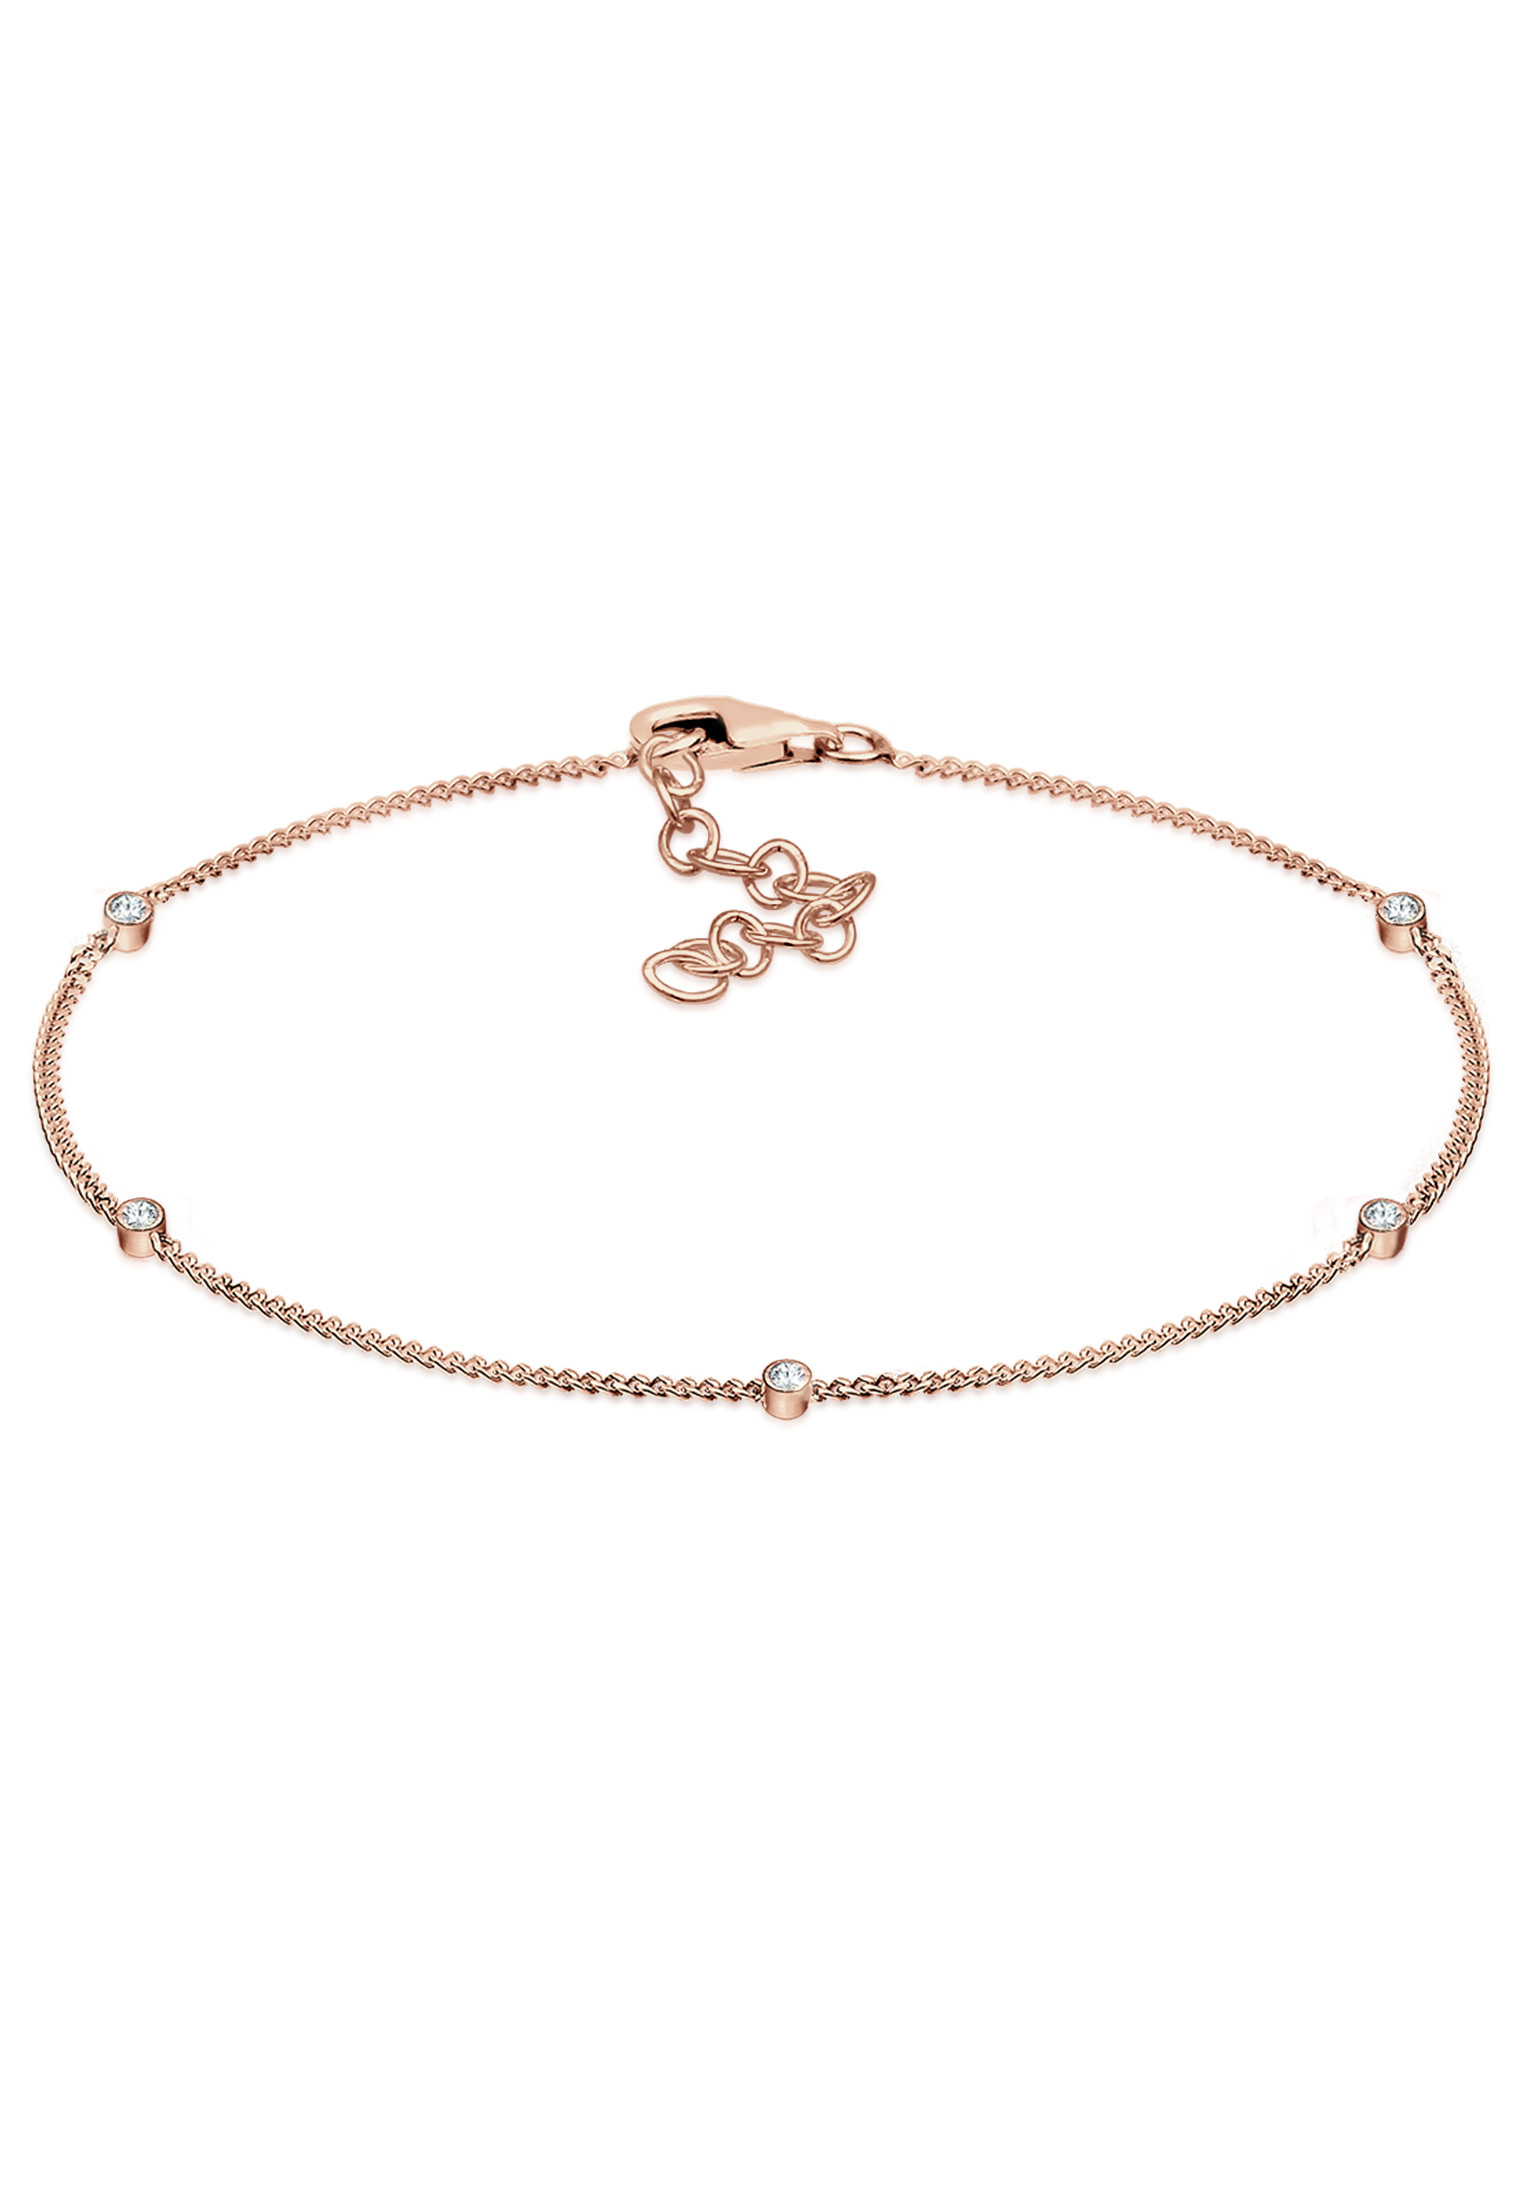 Armband | Kristall ( Weiß ) | 925 Sterling Silber Rosegold